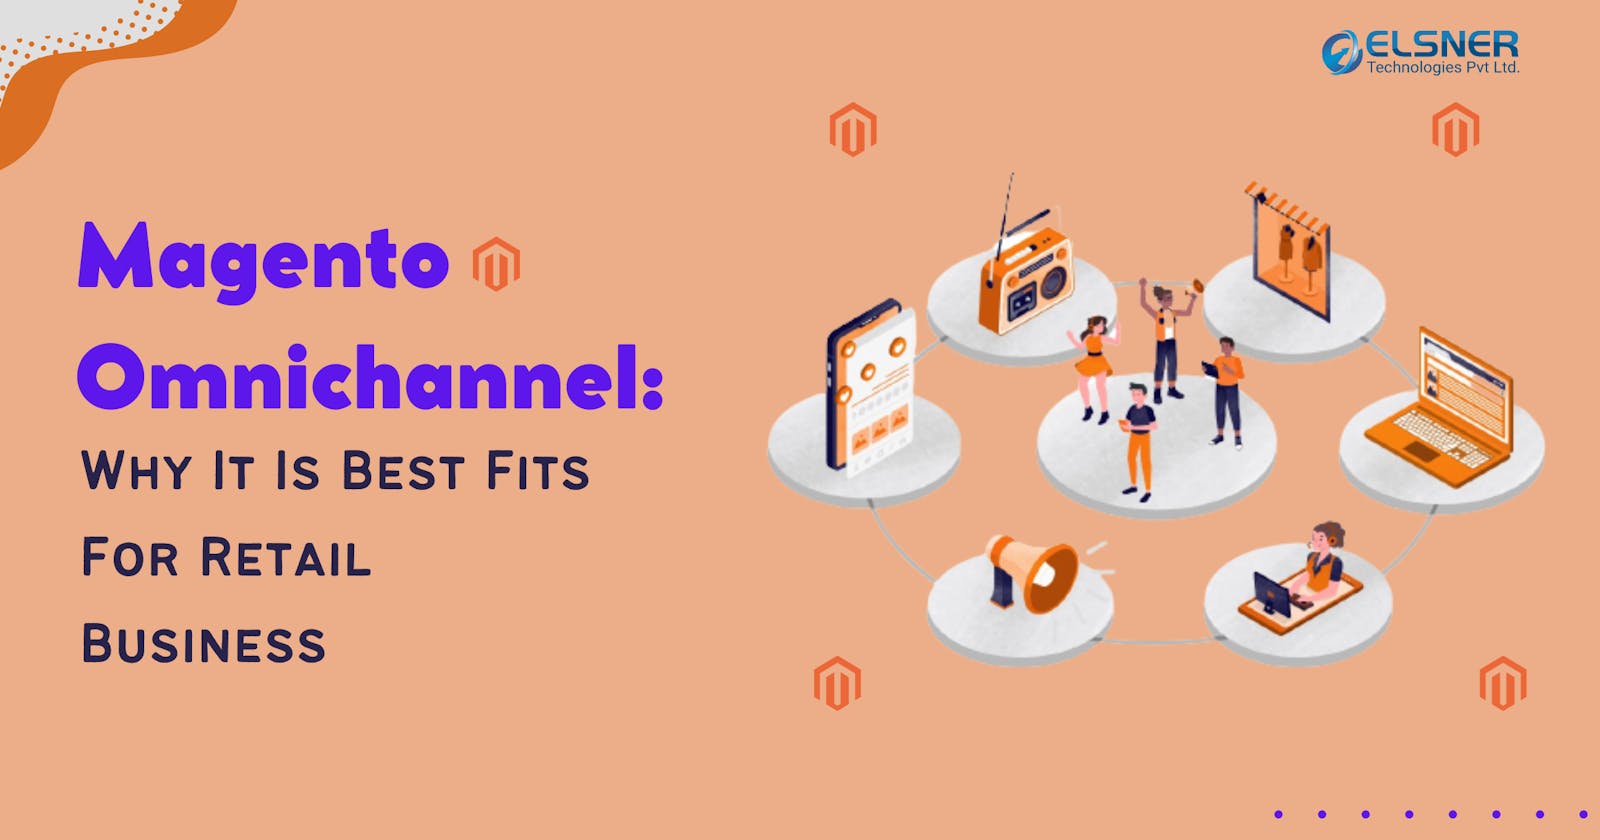 Magento Omnichannel: Why It Is Best Fits For Retail Business